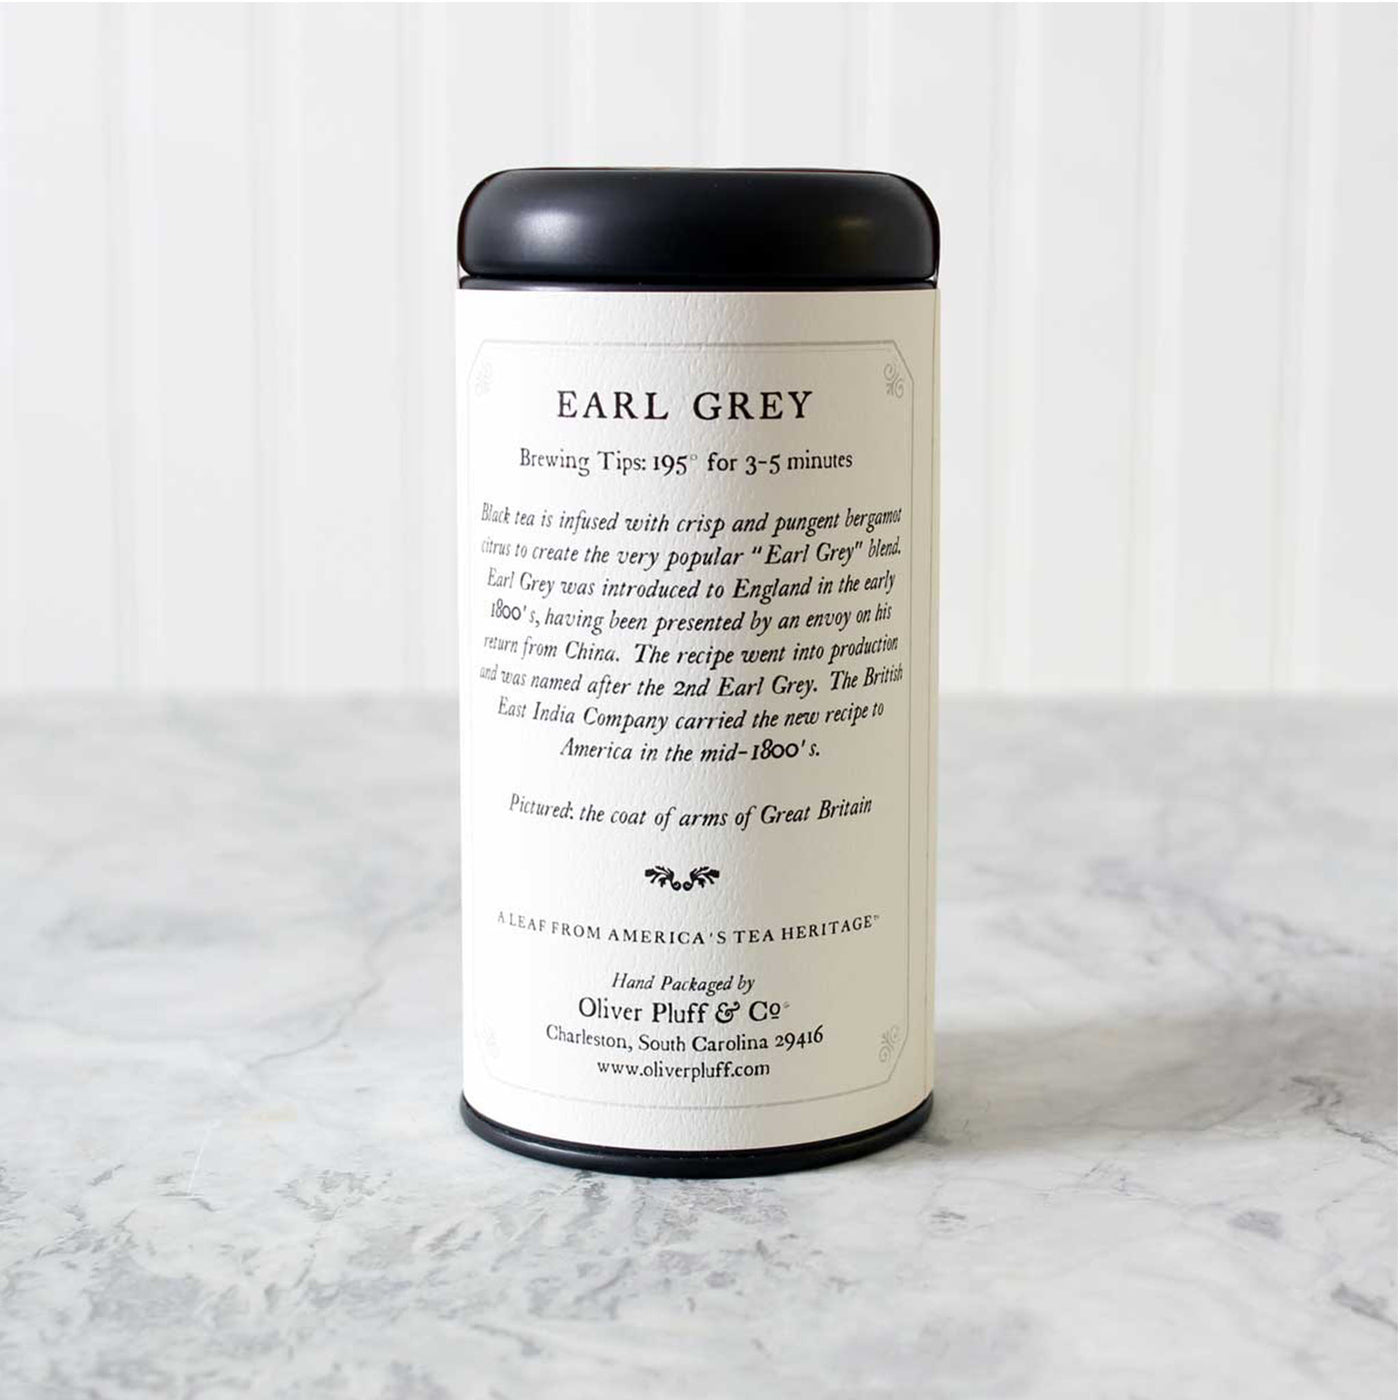 Oliver Pluff & Co. | Earl Grey - Teabags in Signature Tea Tin